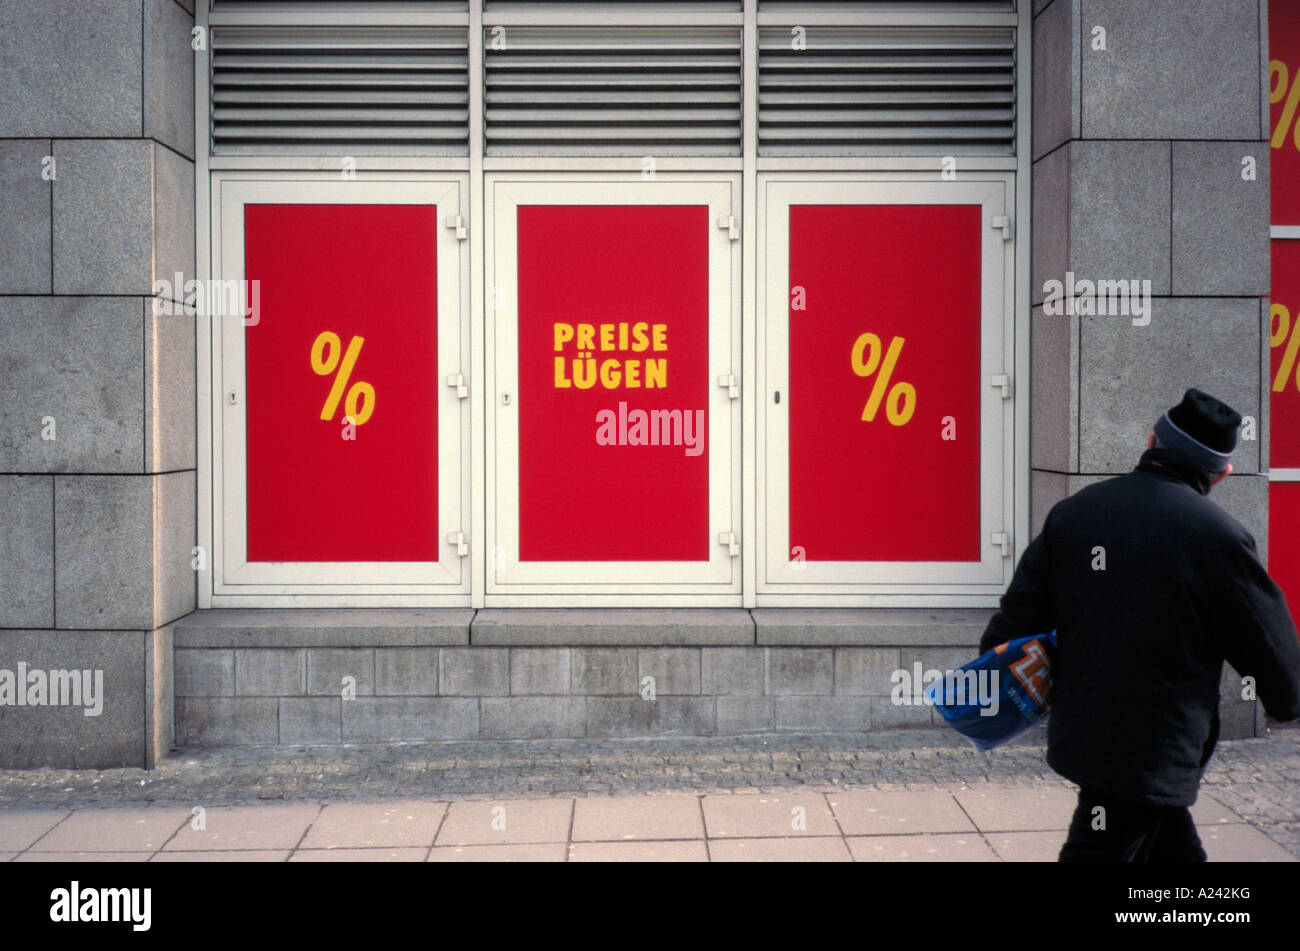 Prices don t lie was written in german on a shop window but the don t has been removed leaving Prices lie Stock Photo